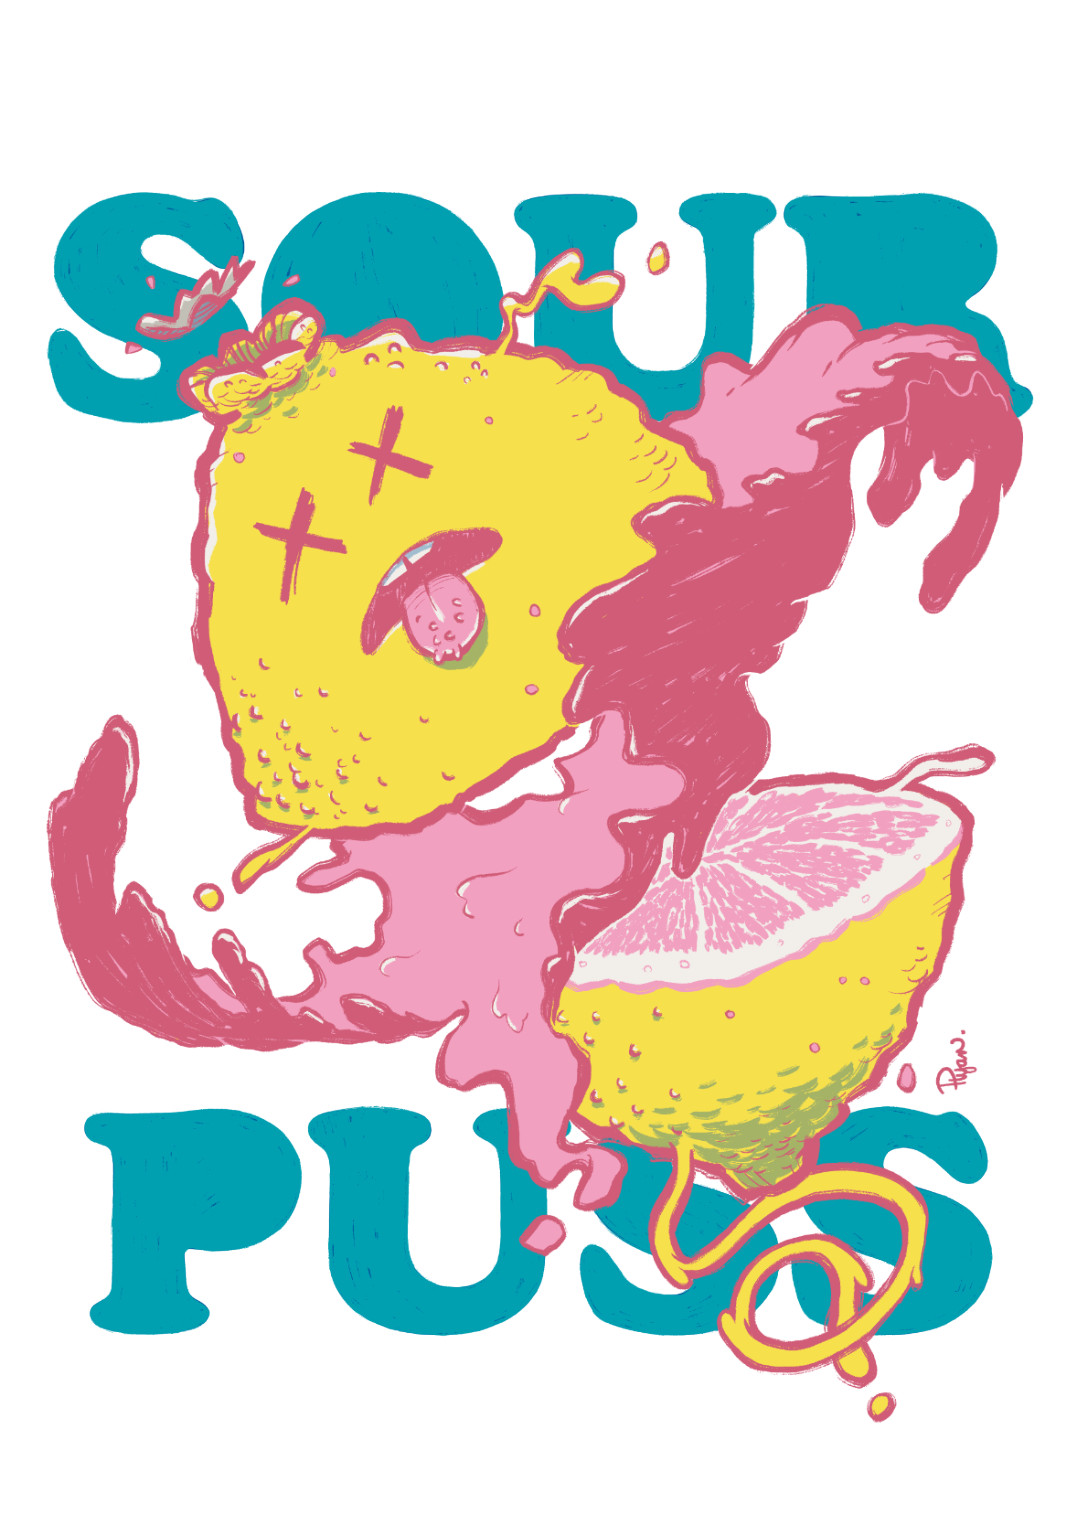 A very juicy lemon is sliced in half over the words Sour Puss.